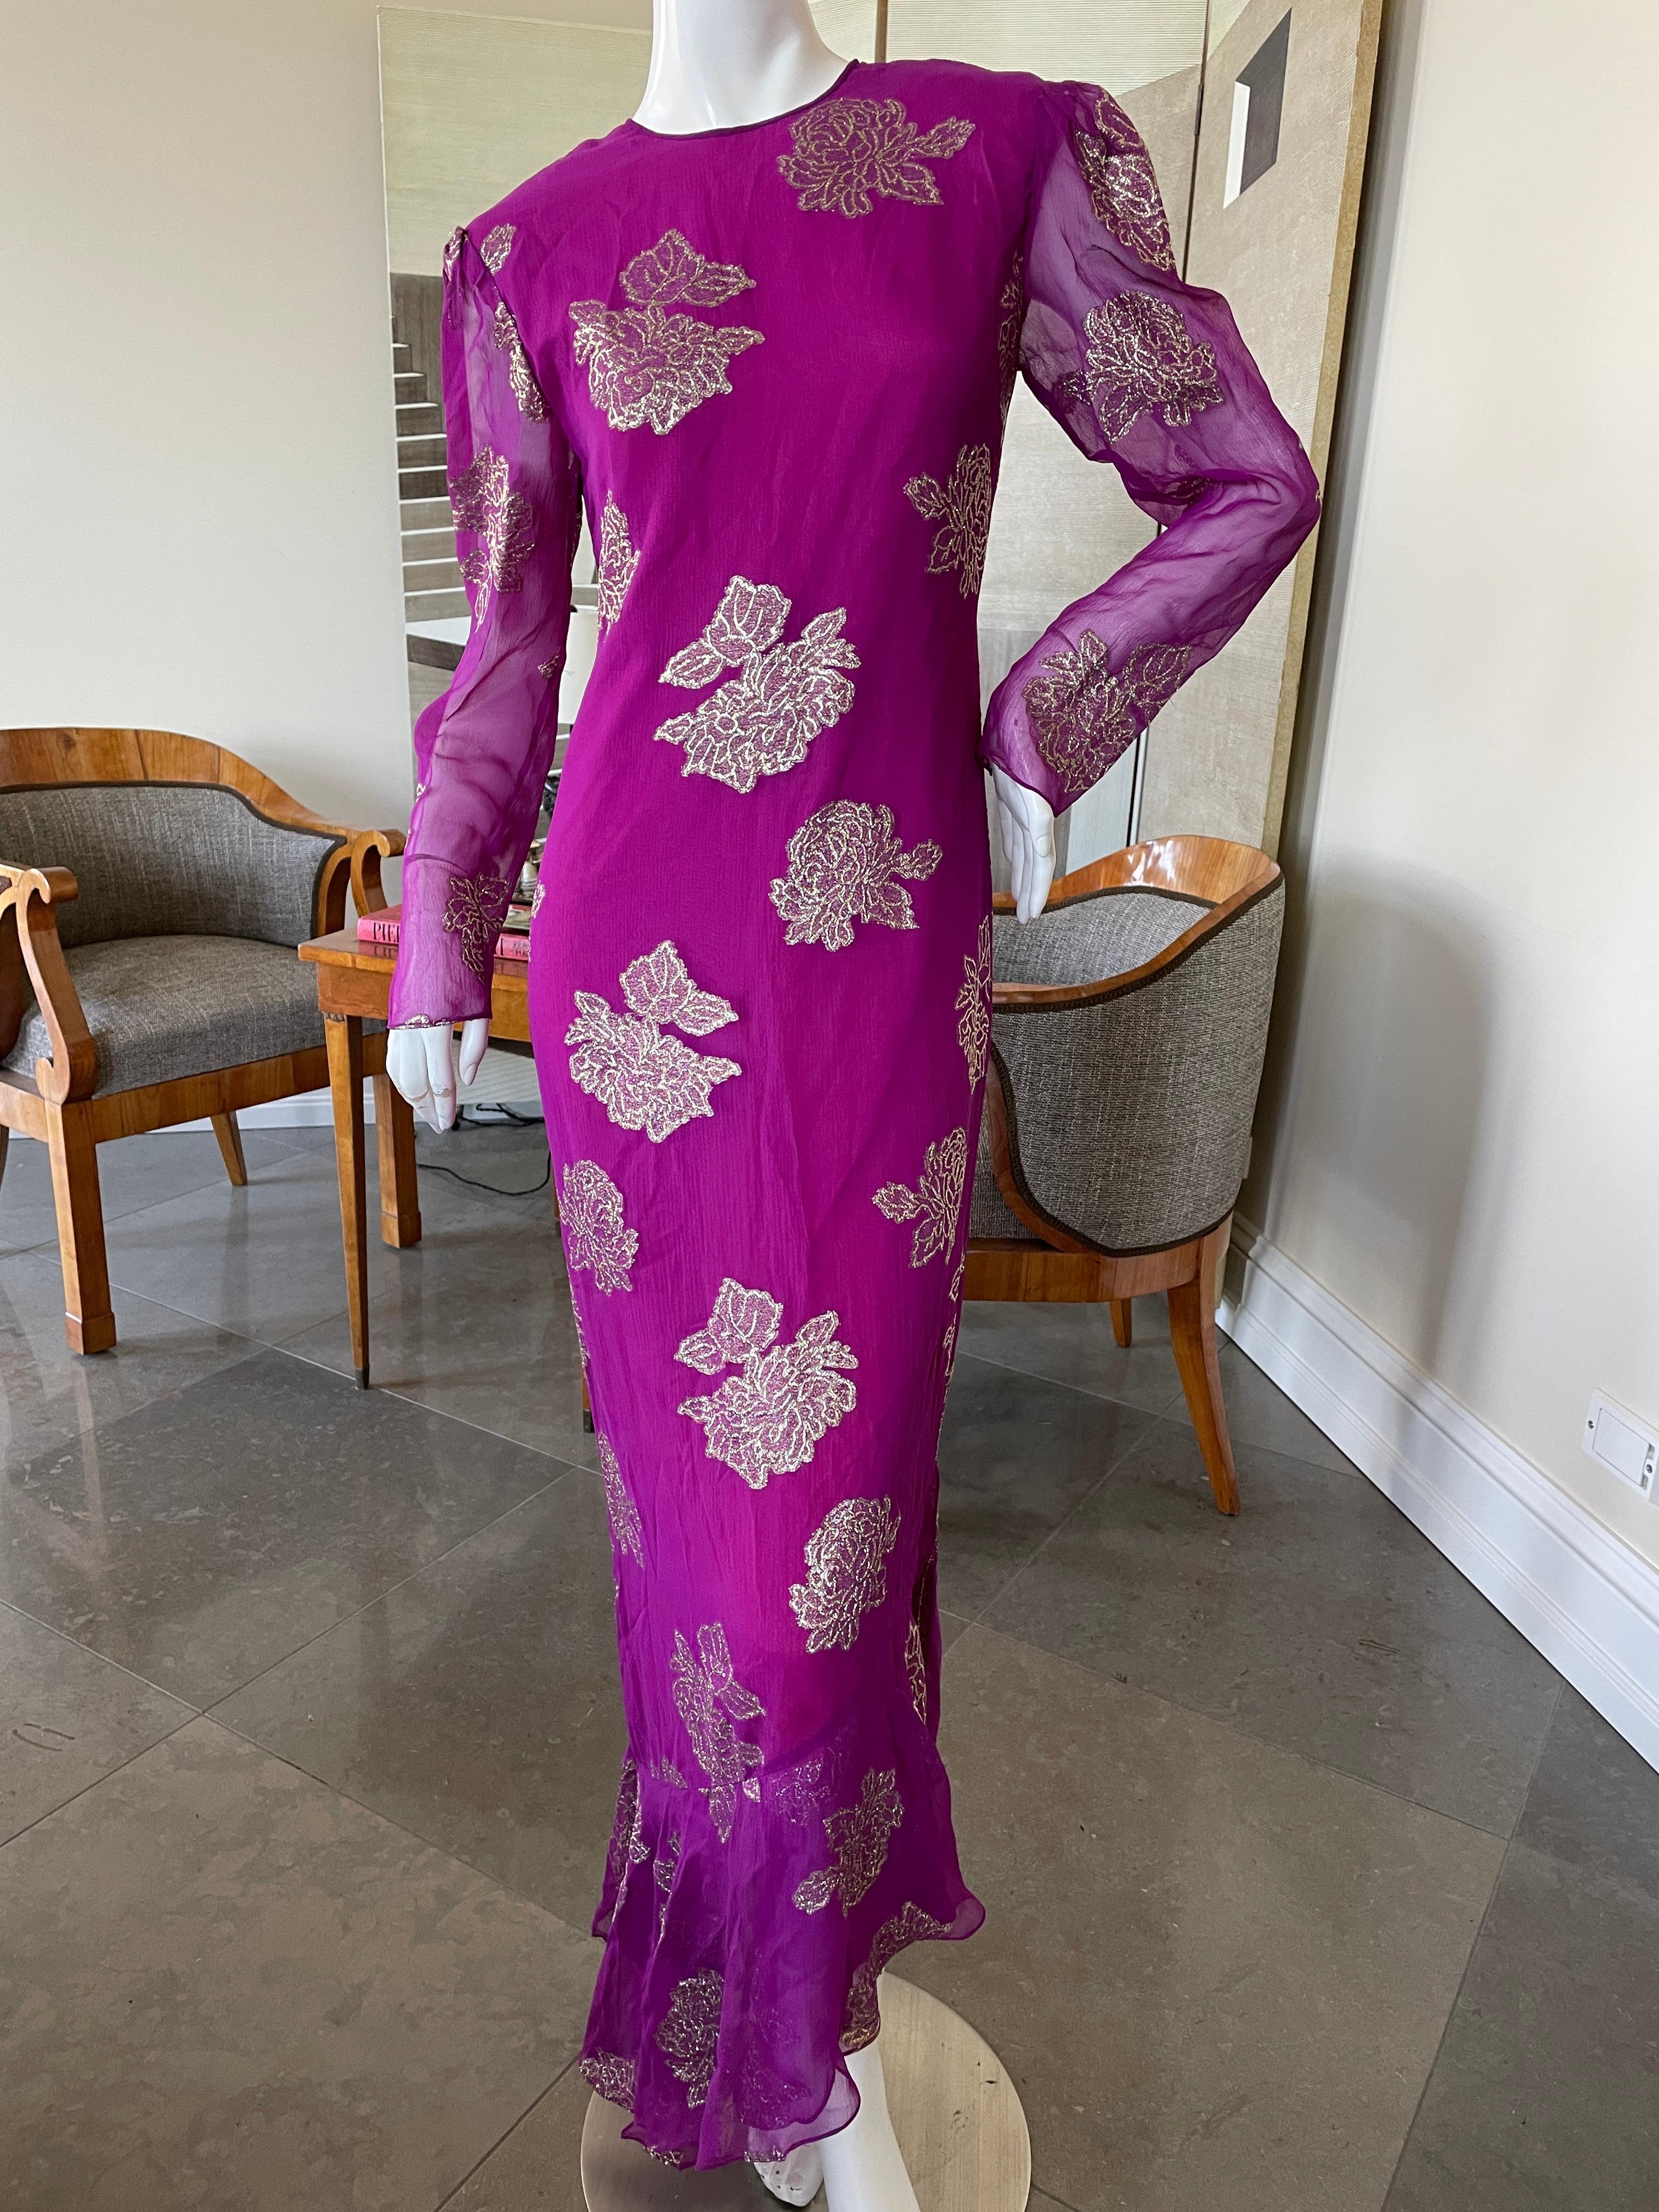 Hanae Mori Deep Pink Silk Chiffon Gold Chrysanthemum Pattern Dress In Excellent Condition For Sale In Cloverdale, CA